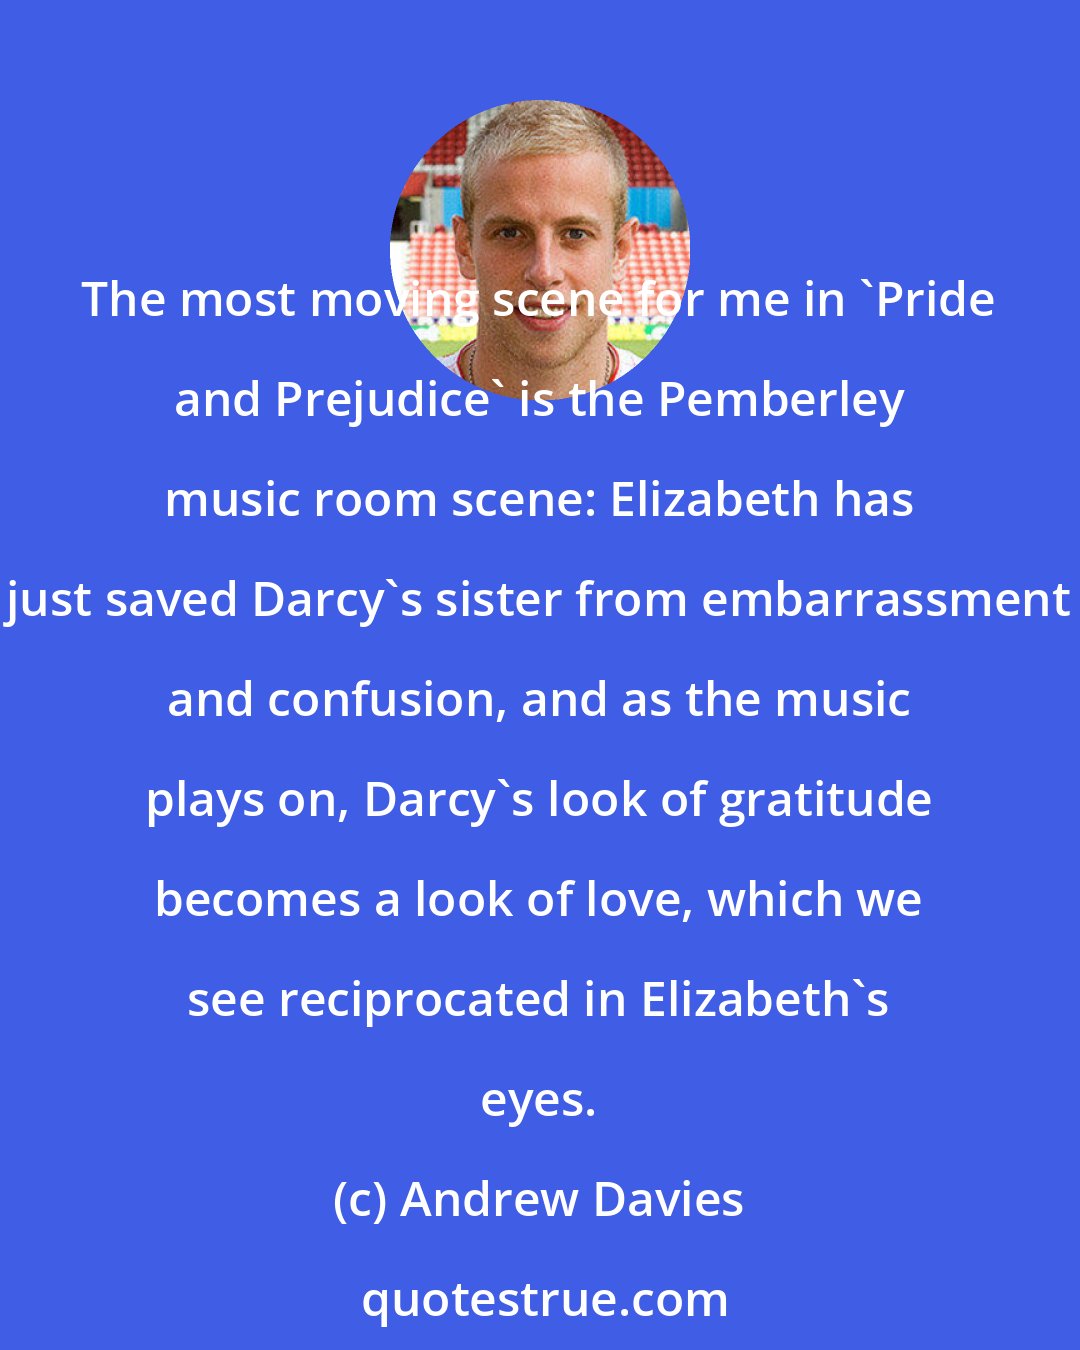 Andrew Davies: The most moving scene for me in 'Pride and Prejudice' is the Pemberley music room scene: Elizabeth has just saved Darcy's sister from embarrassment and confusion, and as the music plays on, Darcy's look of gratitude becomes a look of love, which we see reciprocated in Elizabeth's eyes.